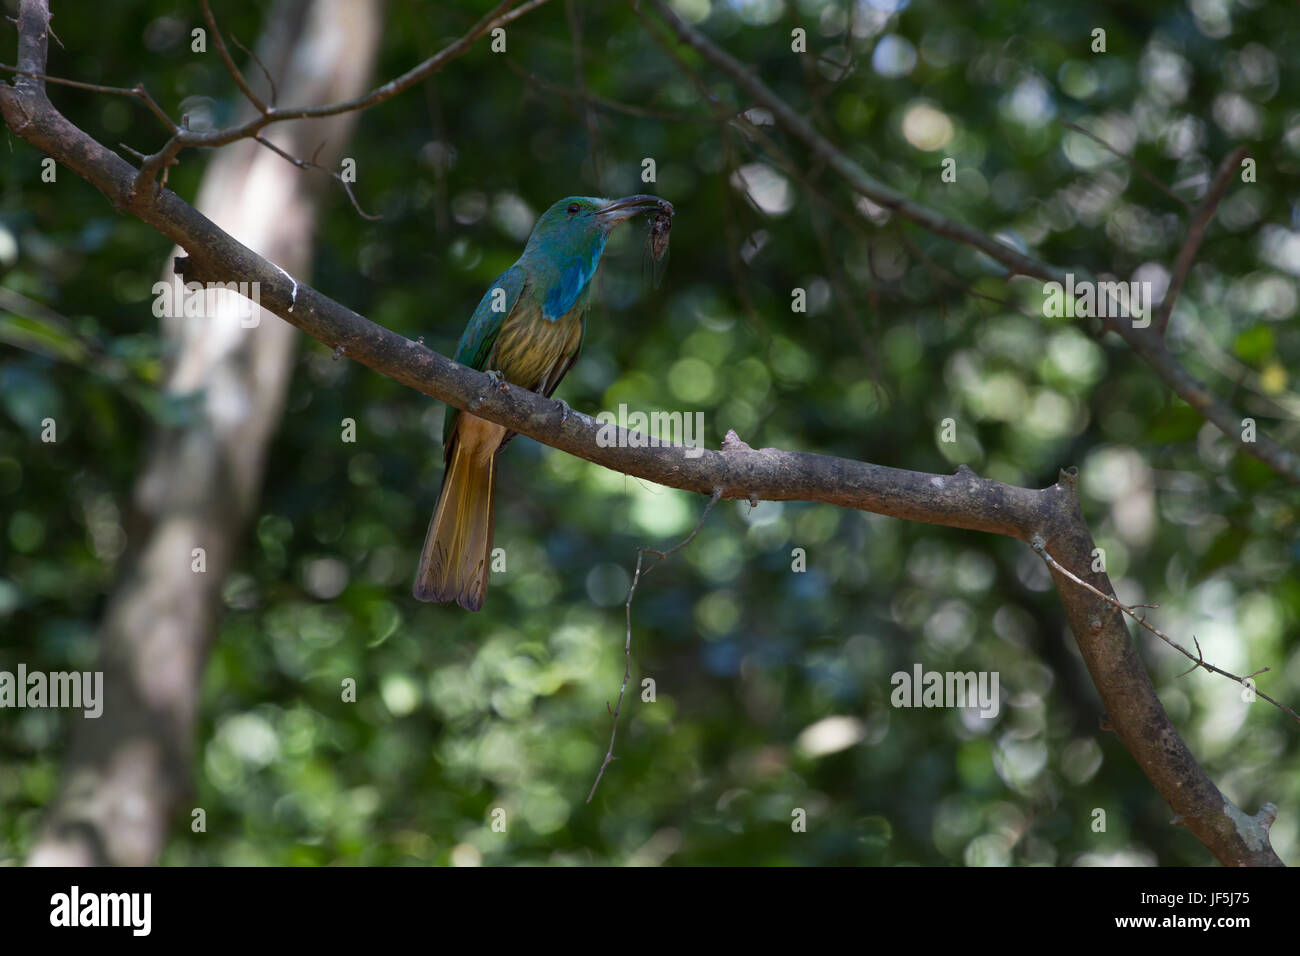 Blue-bearded Bee-eater (Nyctyornis athertoni) on the branch in nature Stock Photo